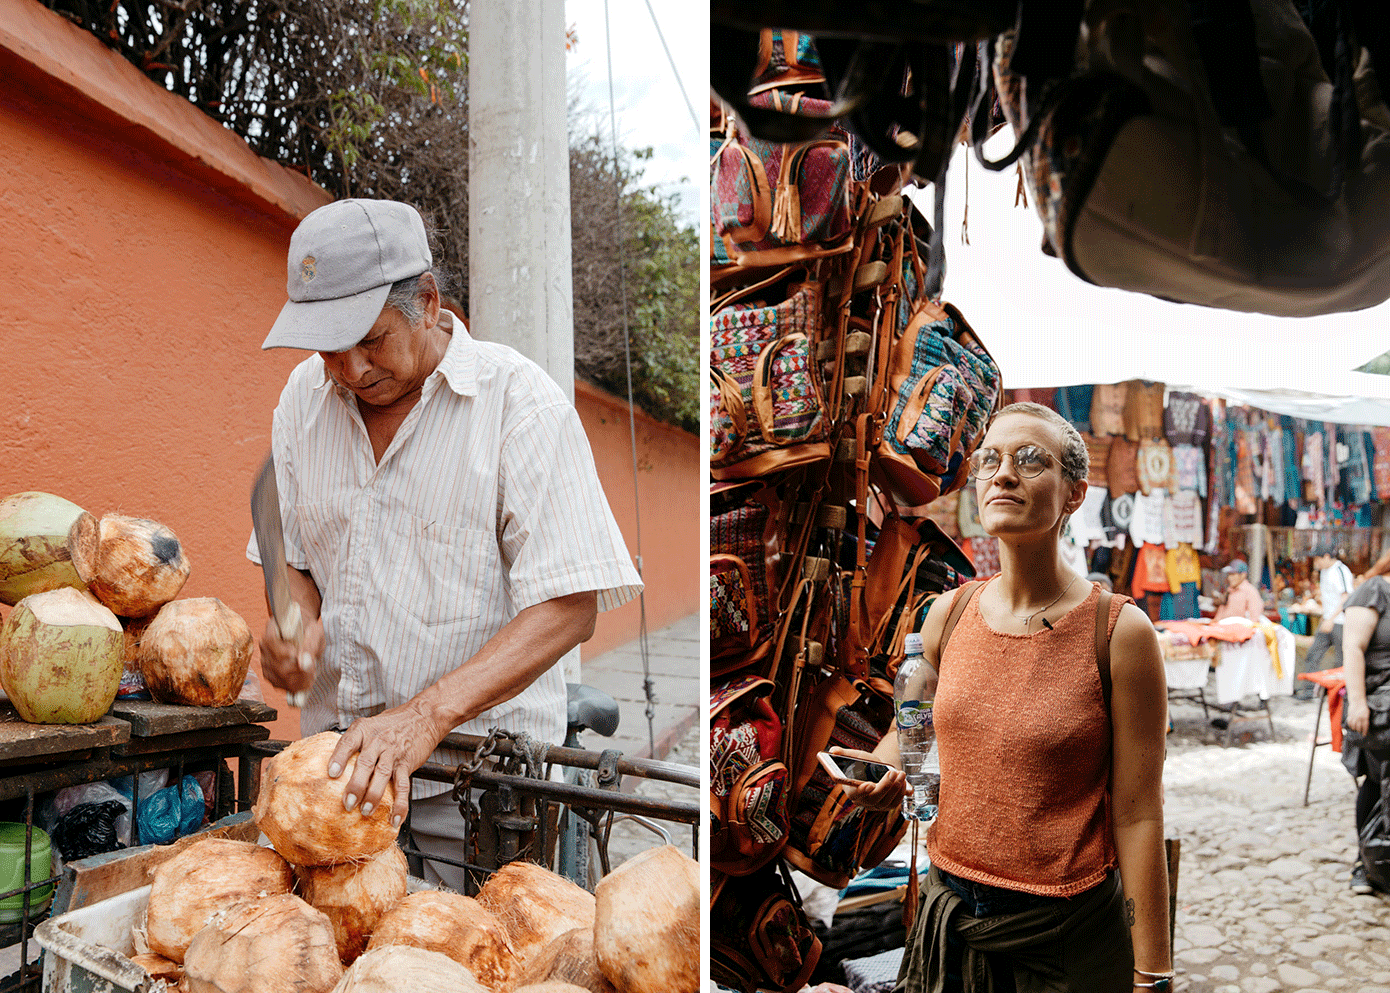 On the left, a man with a machete hacks at a coconut. On the right, a young woman stands in a market full of textile products.